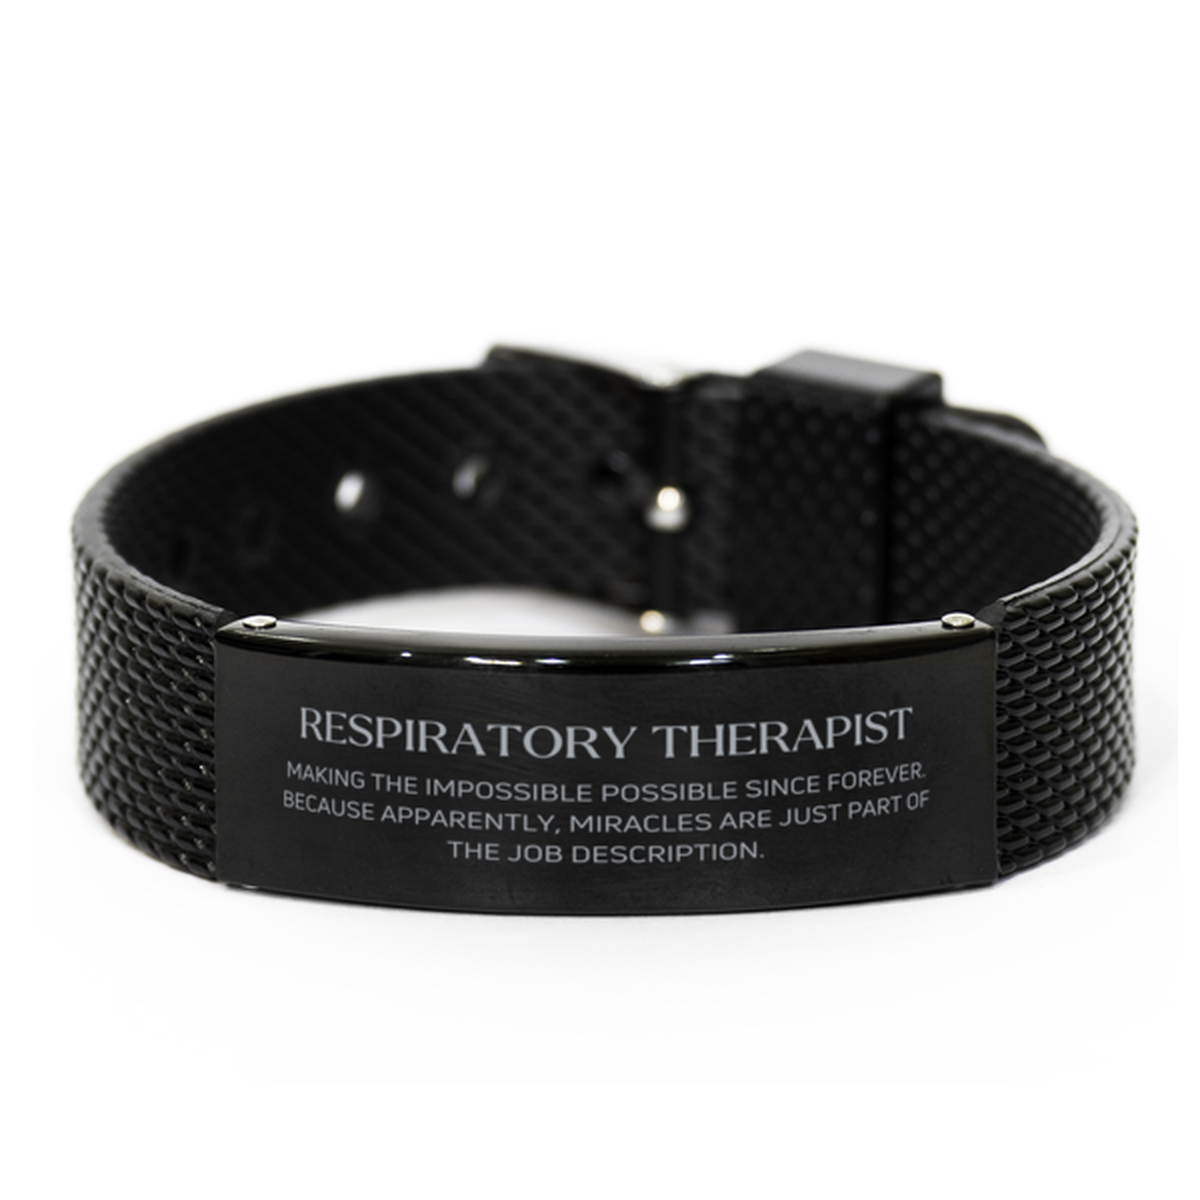 Funny Respiratory Therapist Gifts, Miracles are just part of the job description, Inspirational Birthday Black Shark Mesh Bracelet For Respiratory Therapist, Men, Women, Coworkers, Friends, Boss